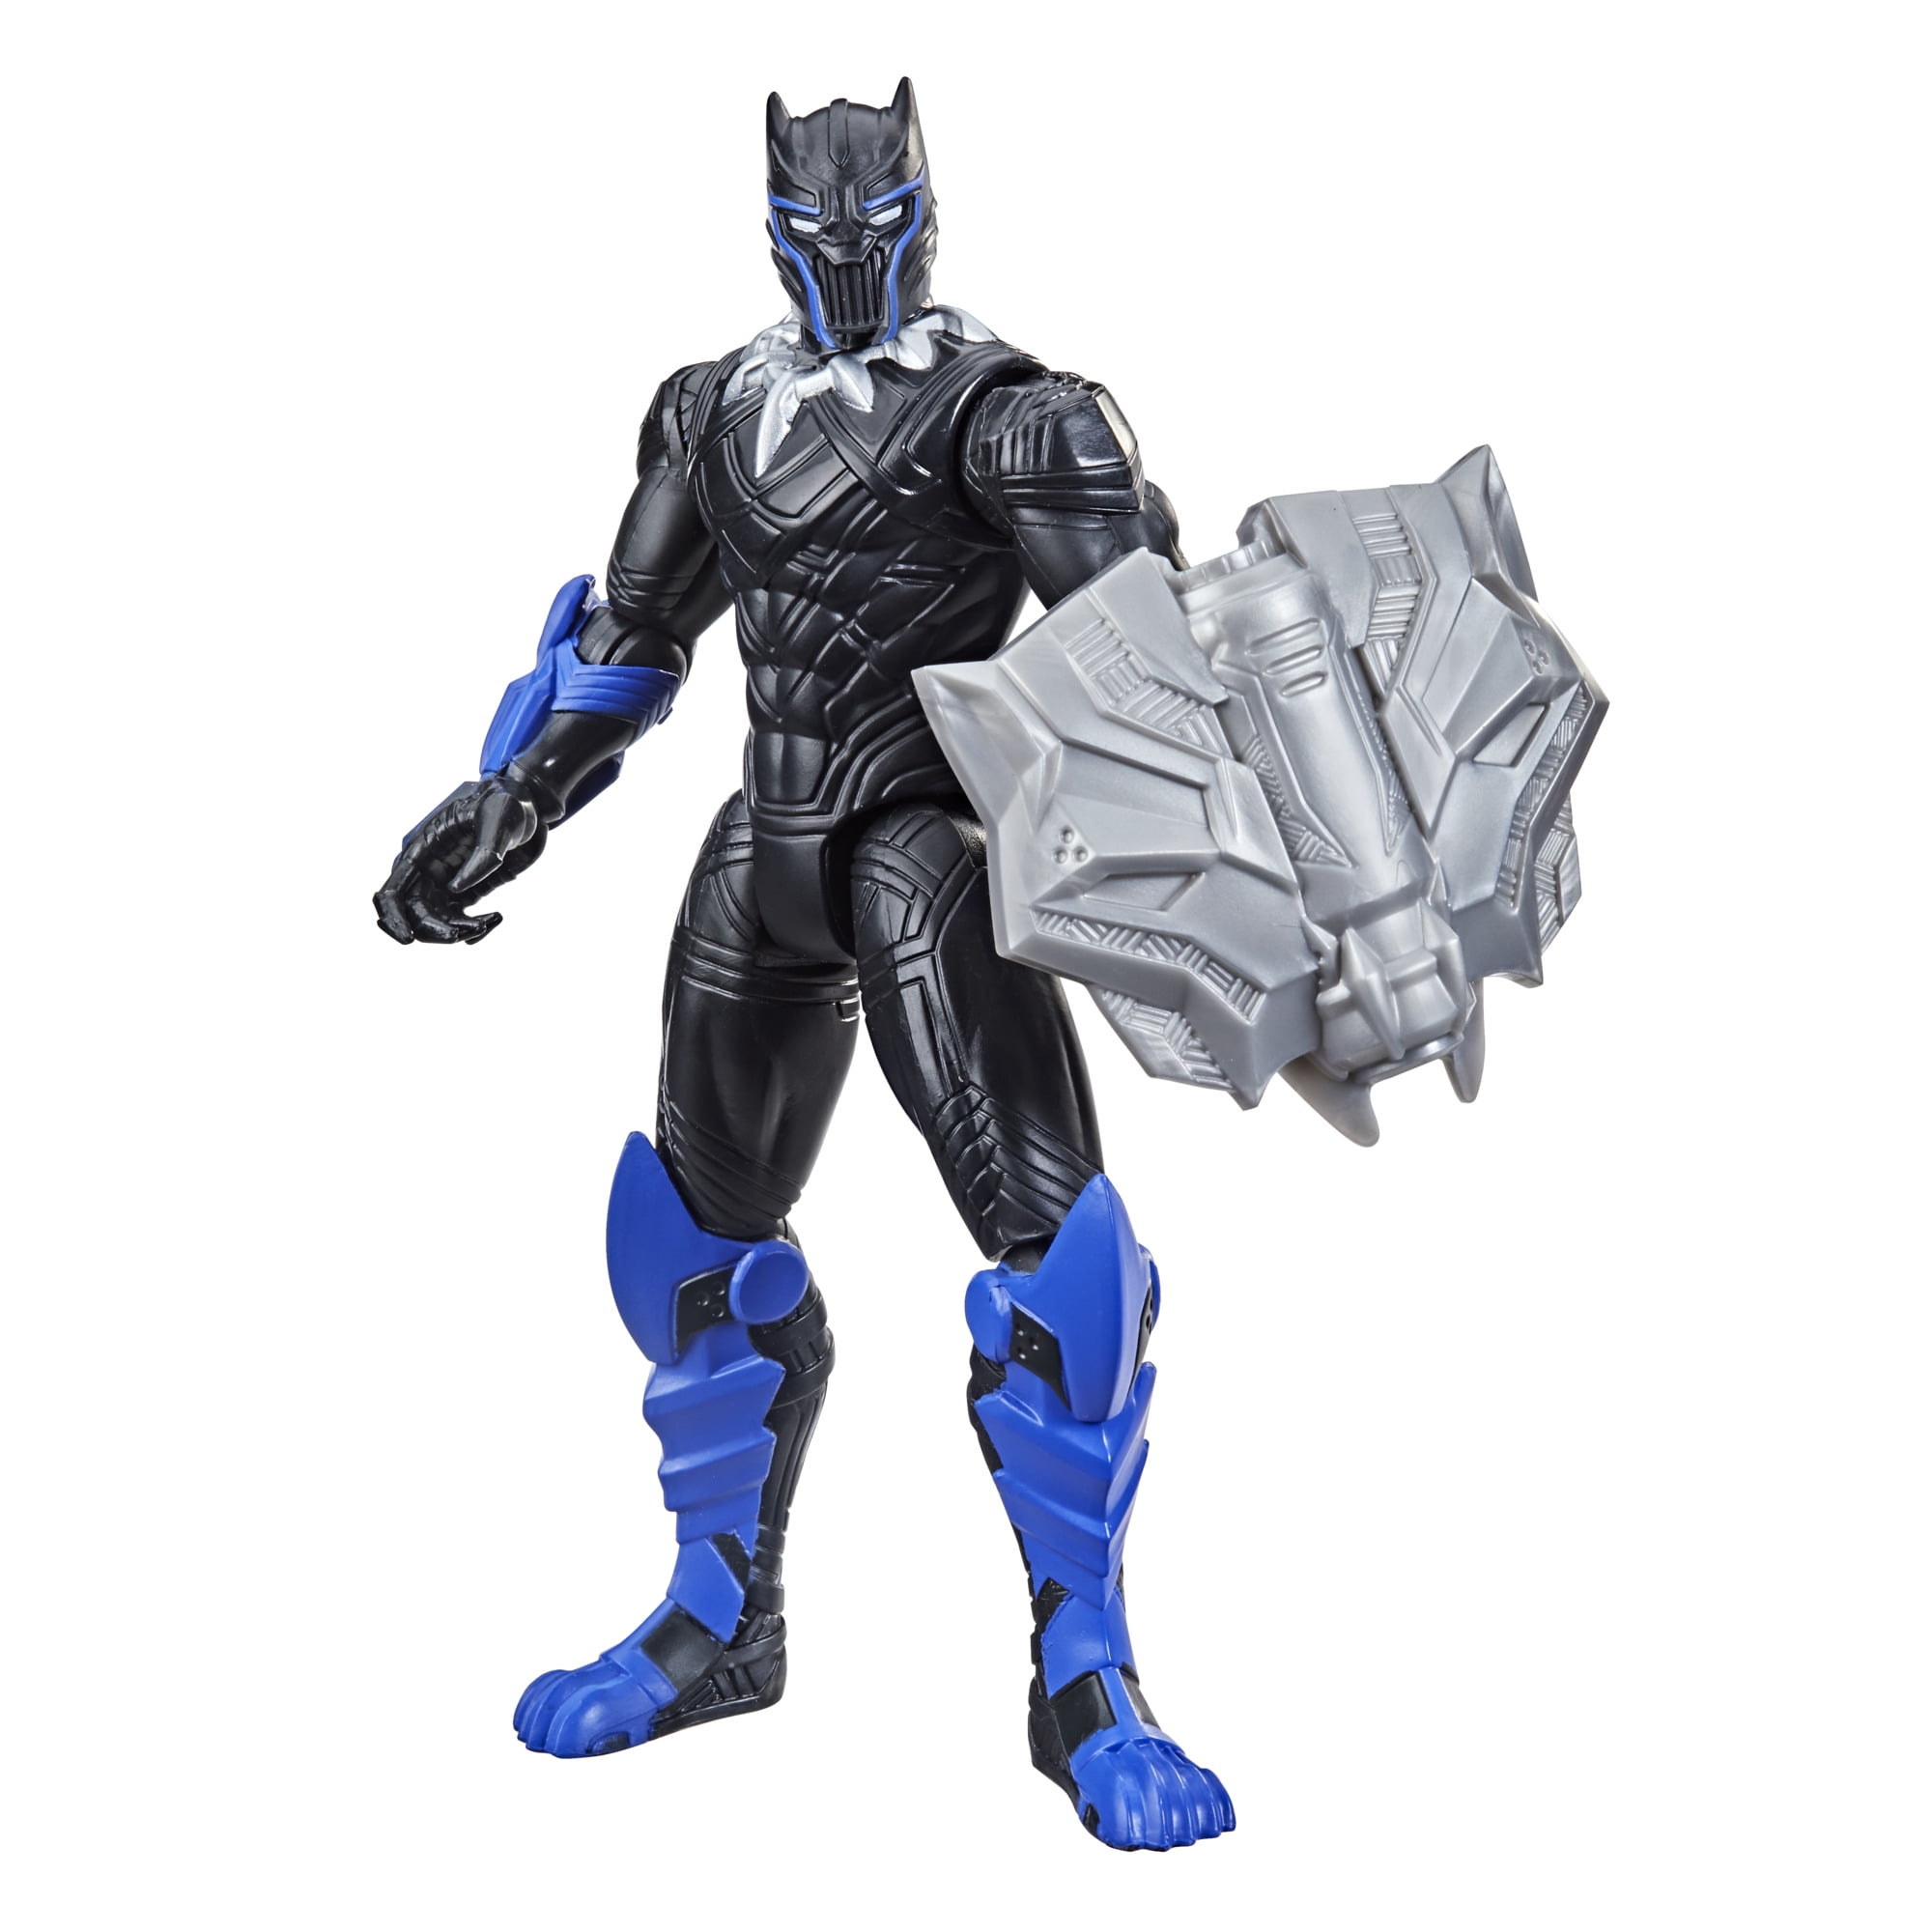 Marvel Black Panther 6 inch Action Figure Avenger B6932 Hasbro FREE SHIPPING 